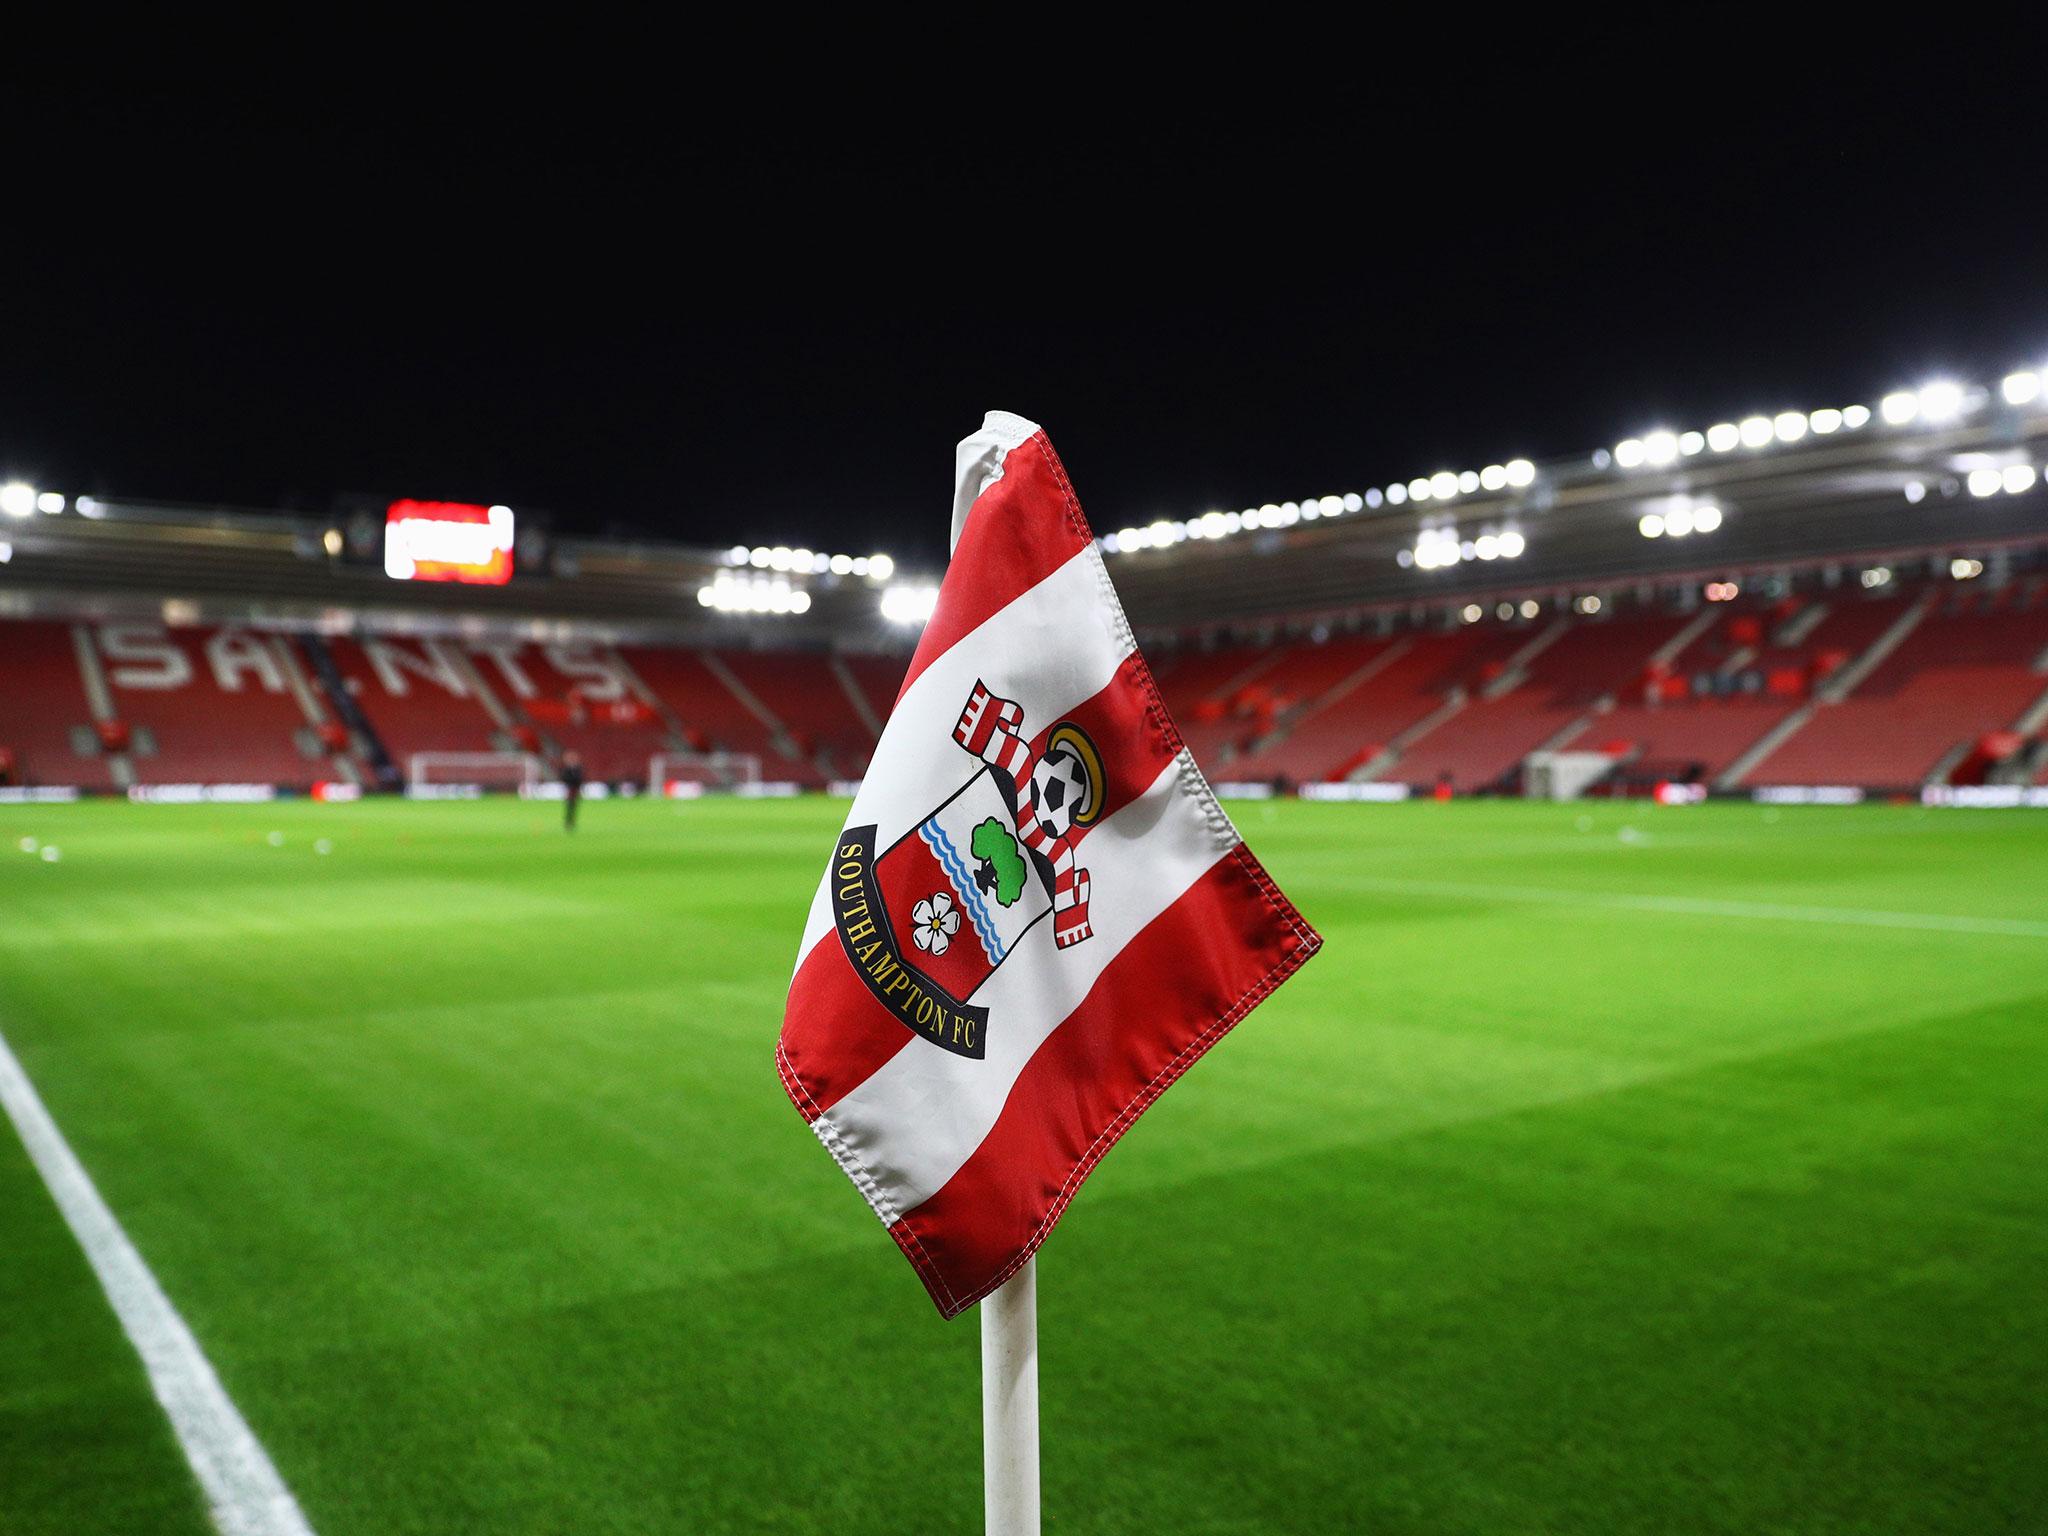 Southampton have splashed out £5m on the defender